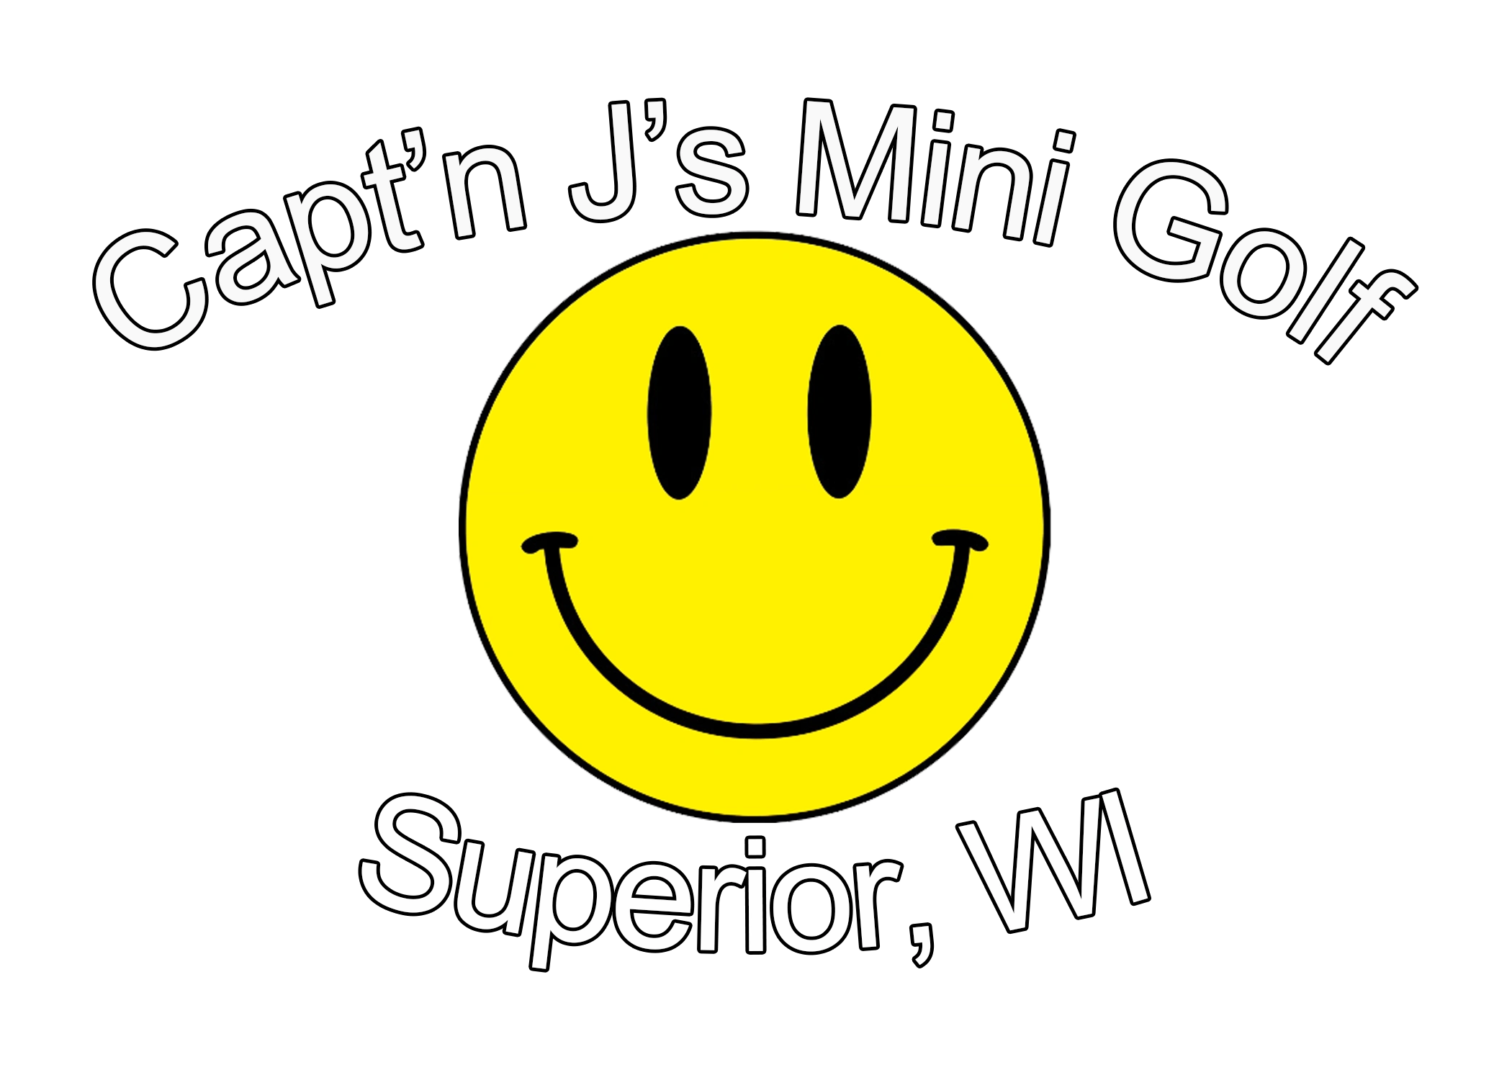 Logo of capt'n j's mini golf featuring a smiling yellow face and the text "superior, wi" with a white and black striped background.